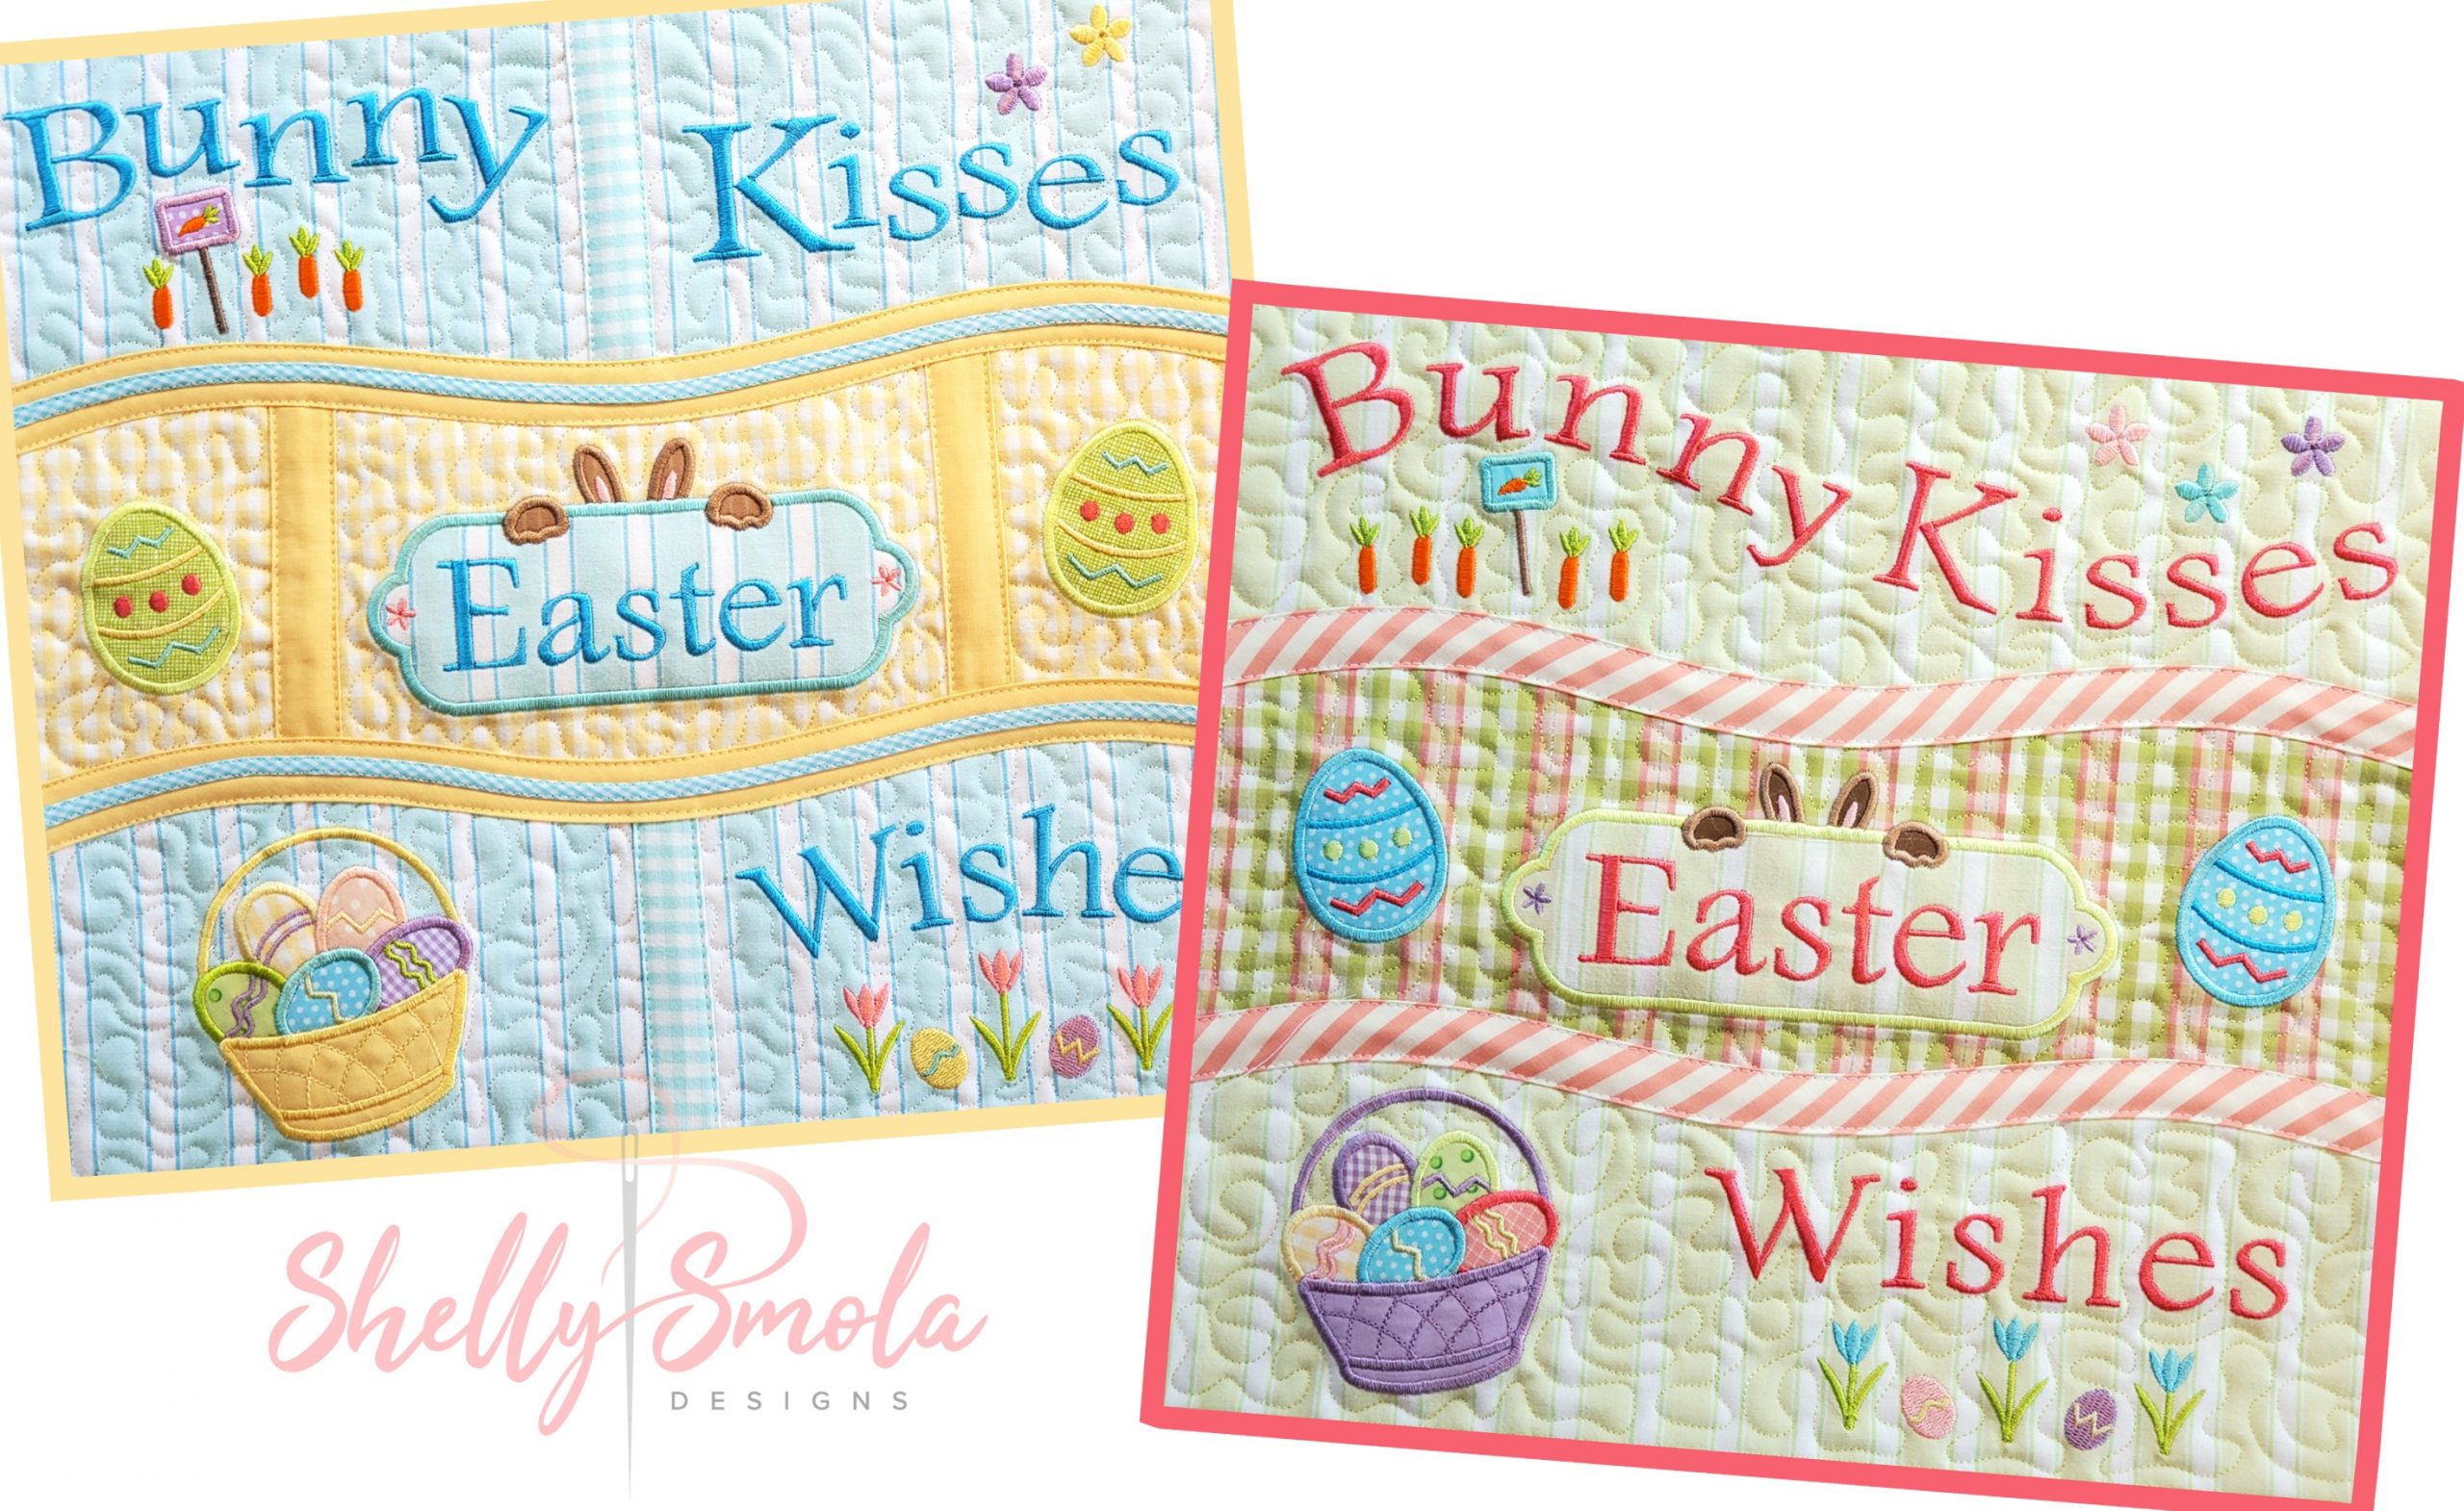 Bunny Kisses Placemats by Shelly Smola